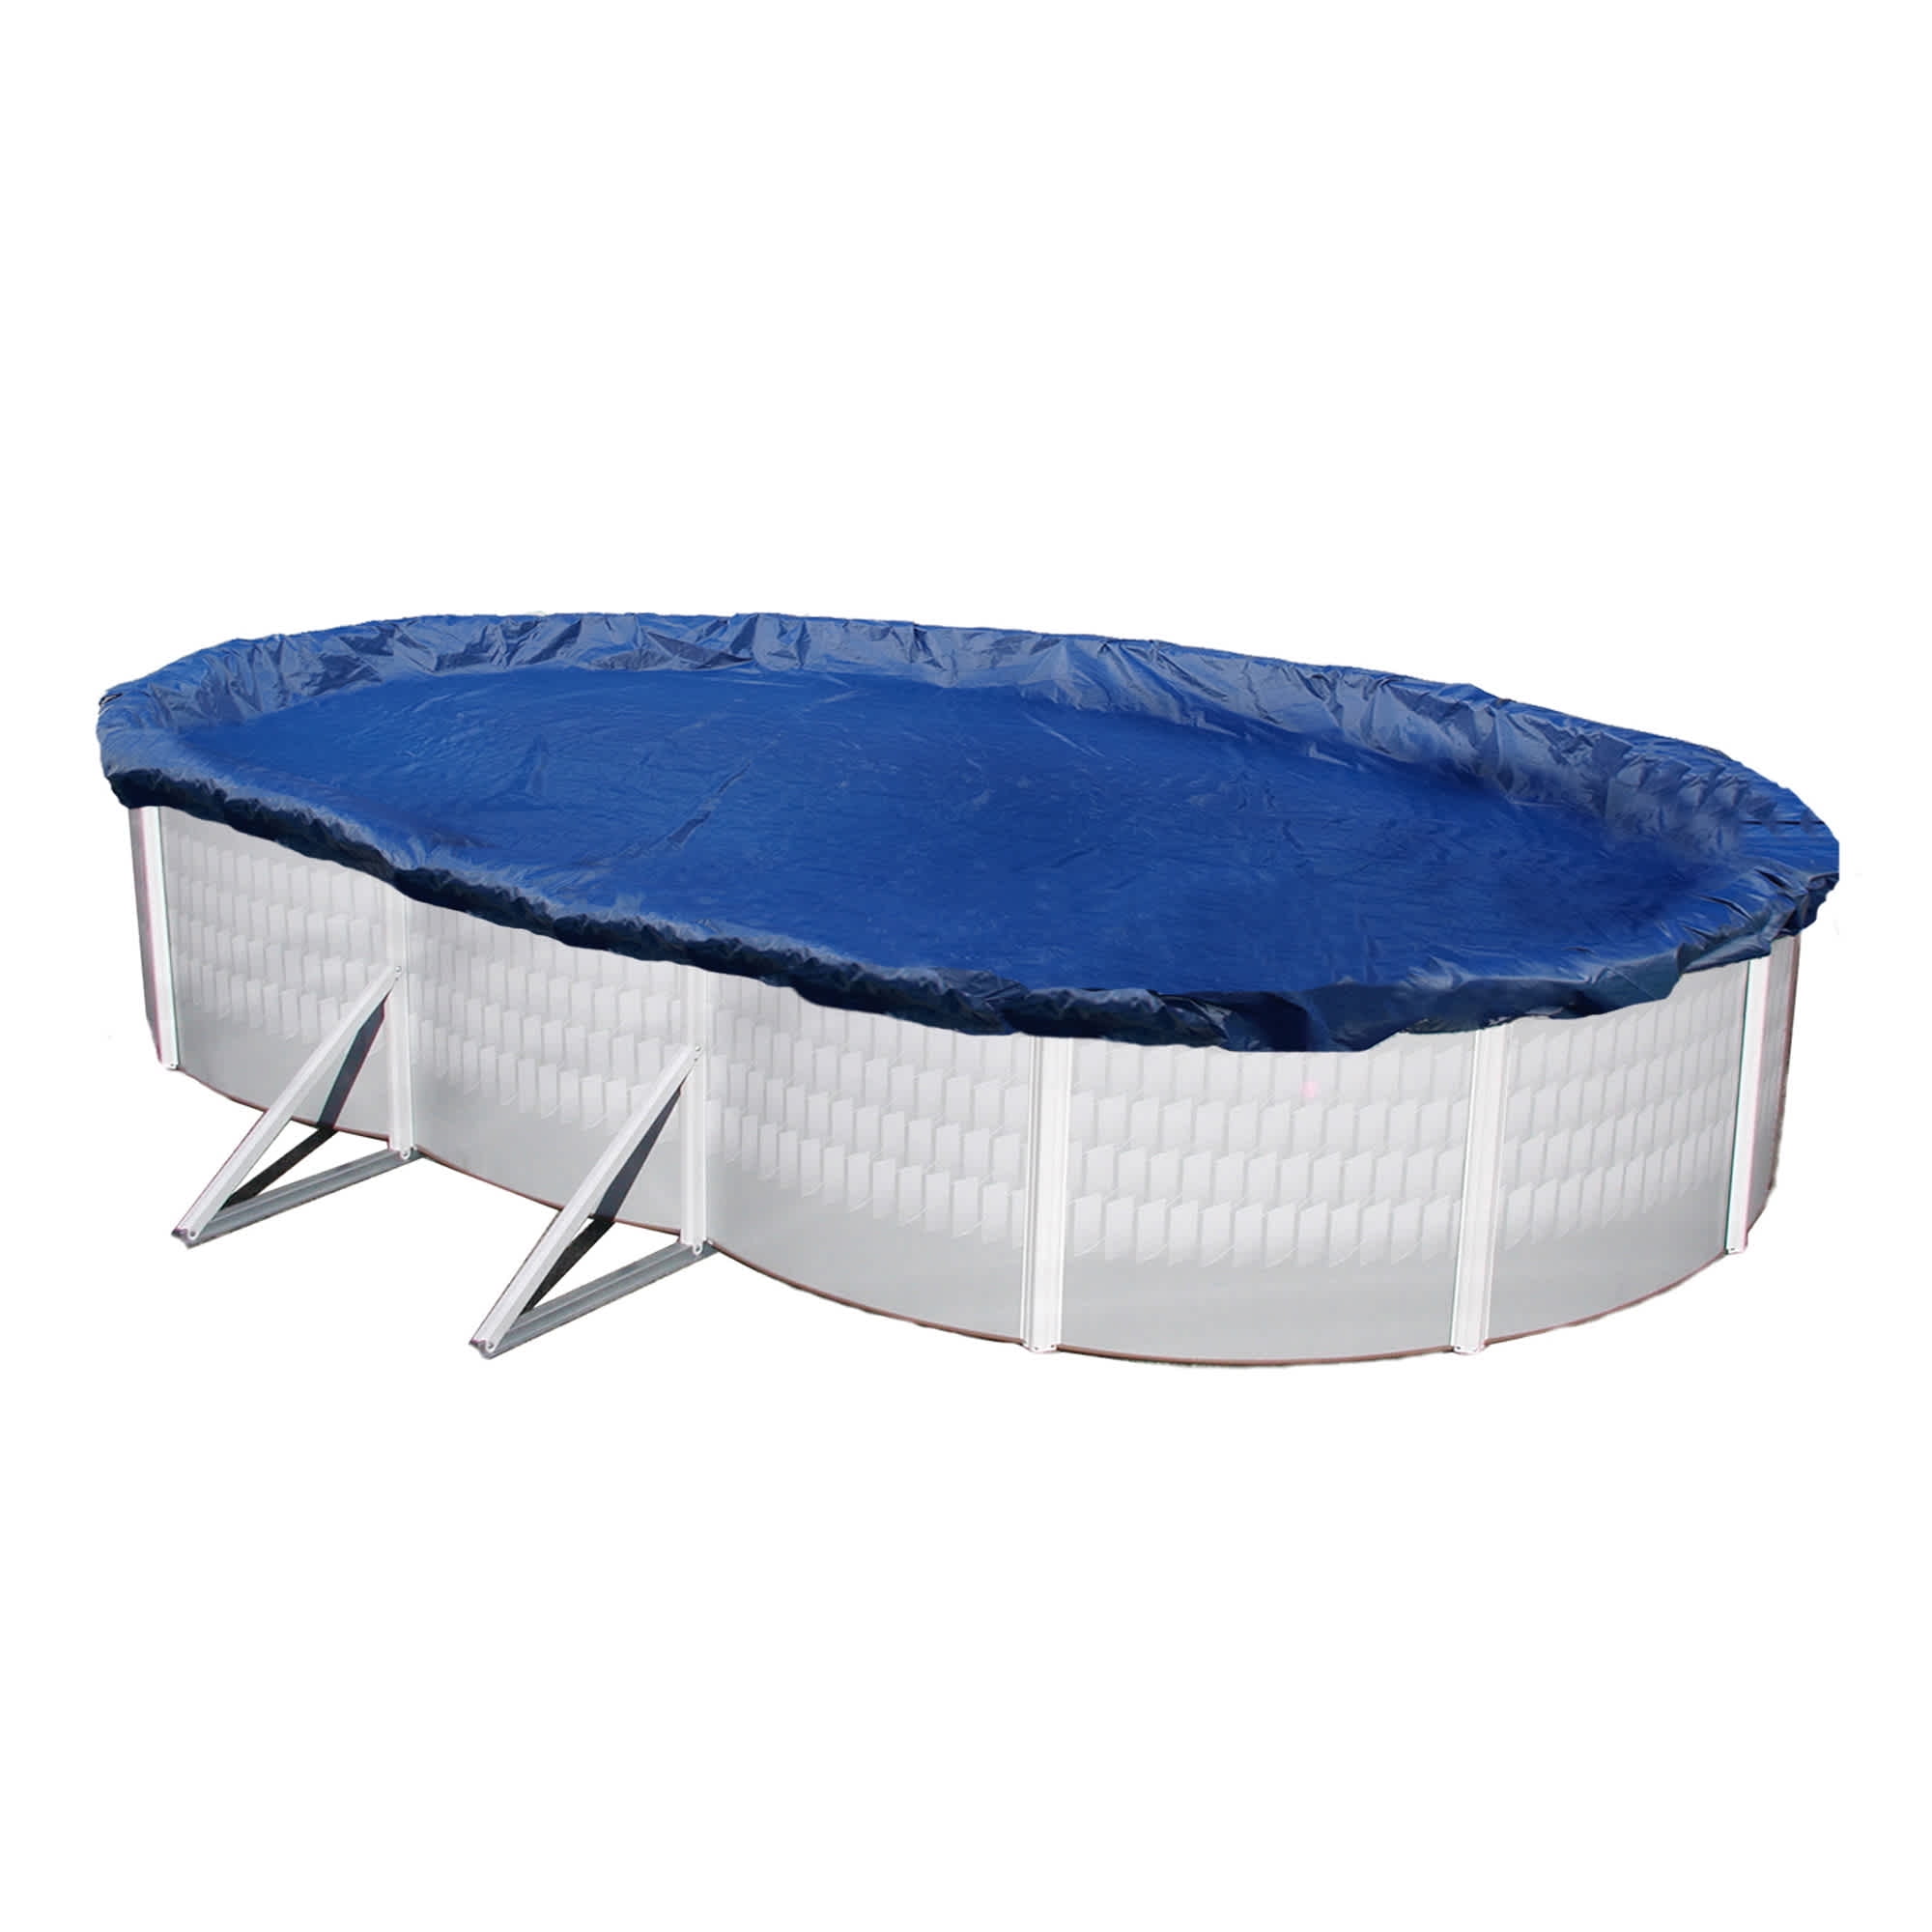 Swimming Pool Winter Covers Pool Style Above Ground Silver Pro Oval 15 YEAR 